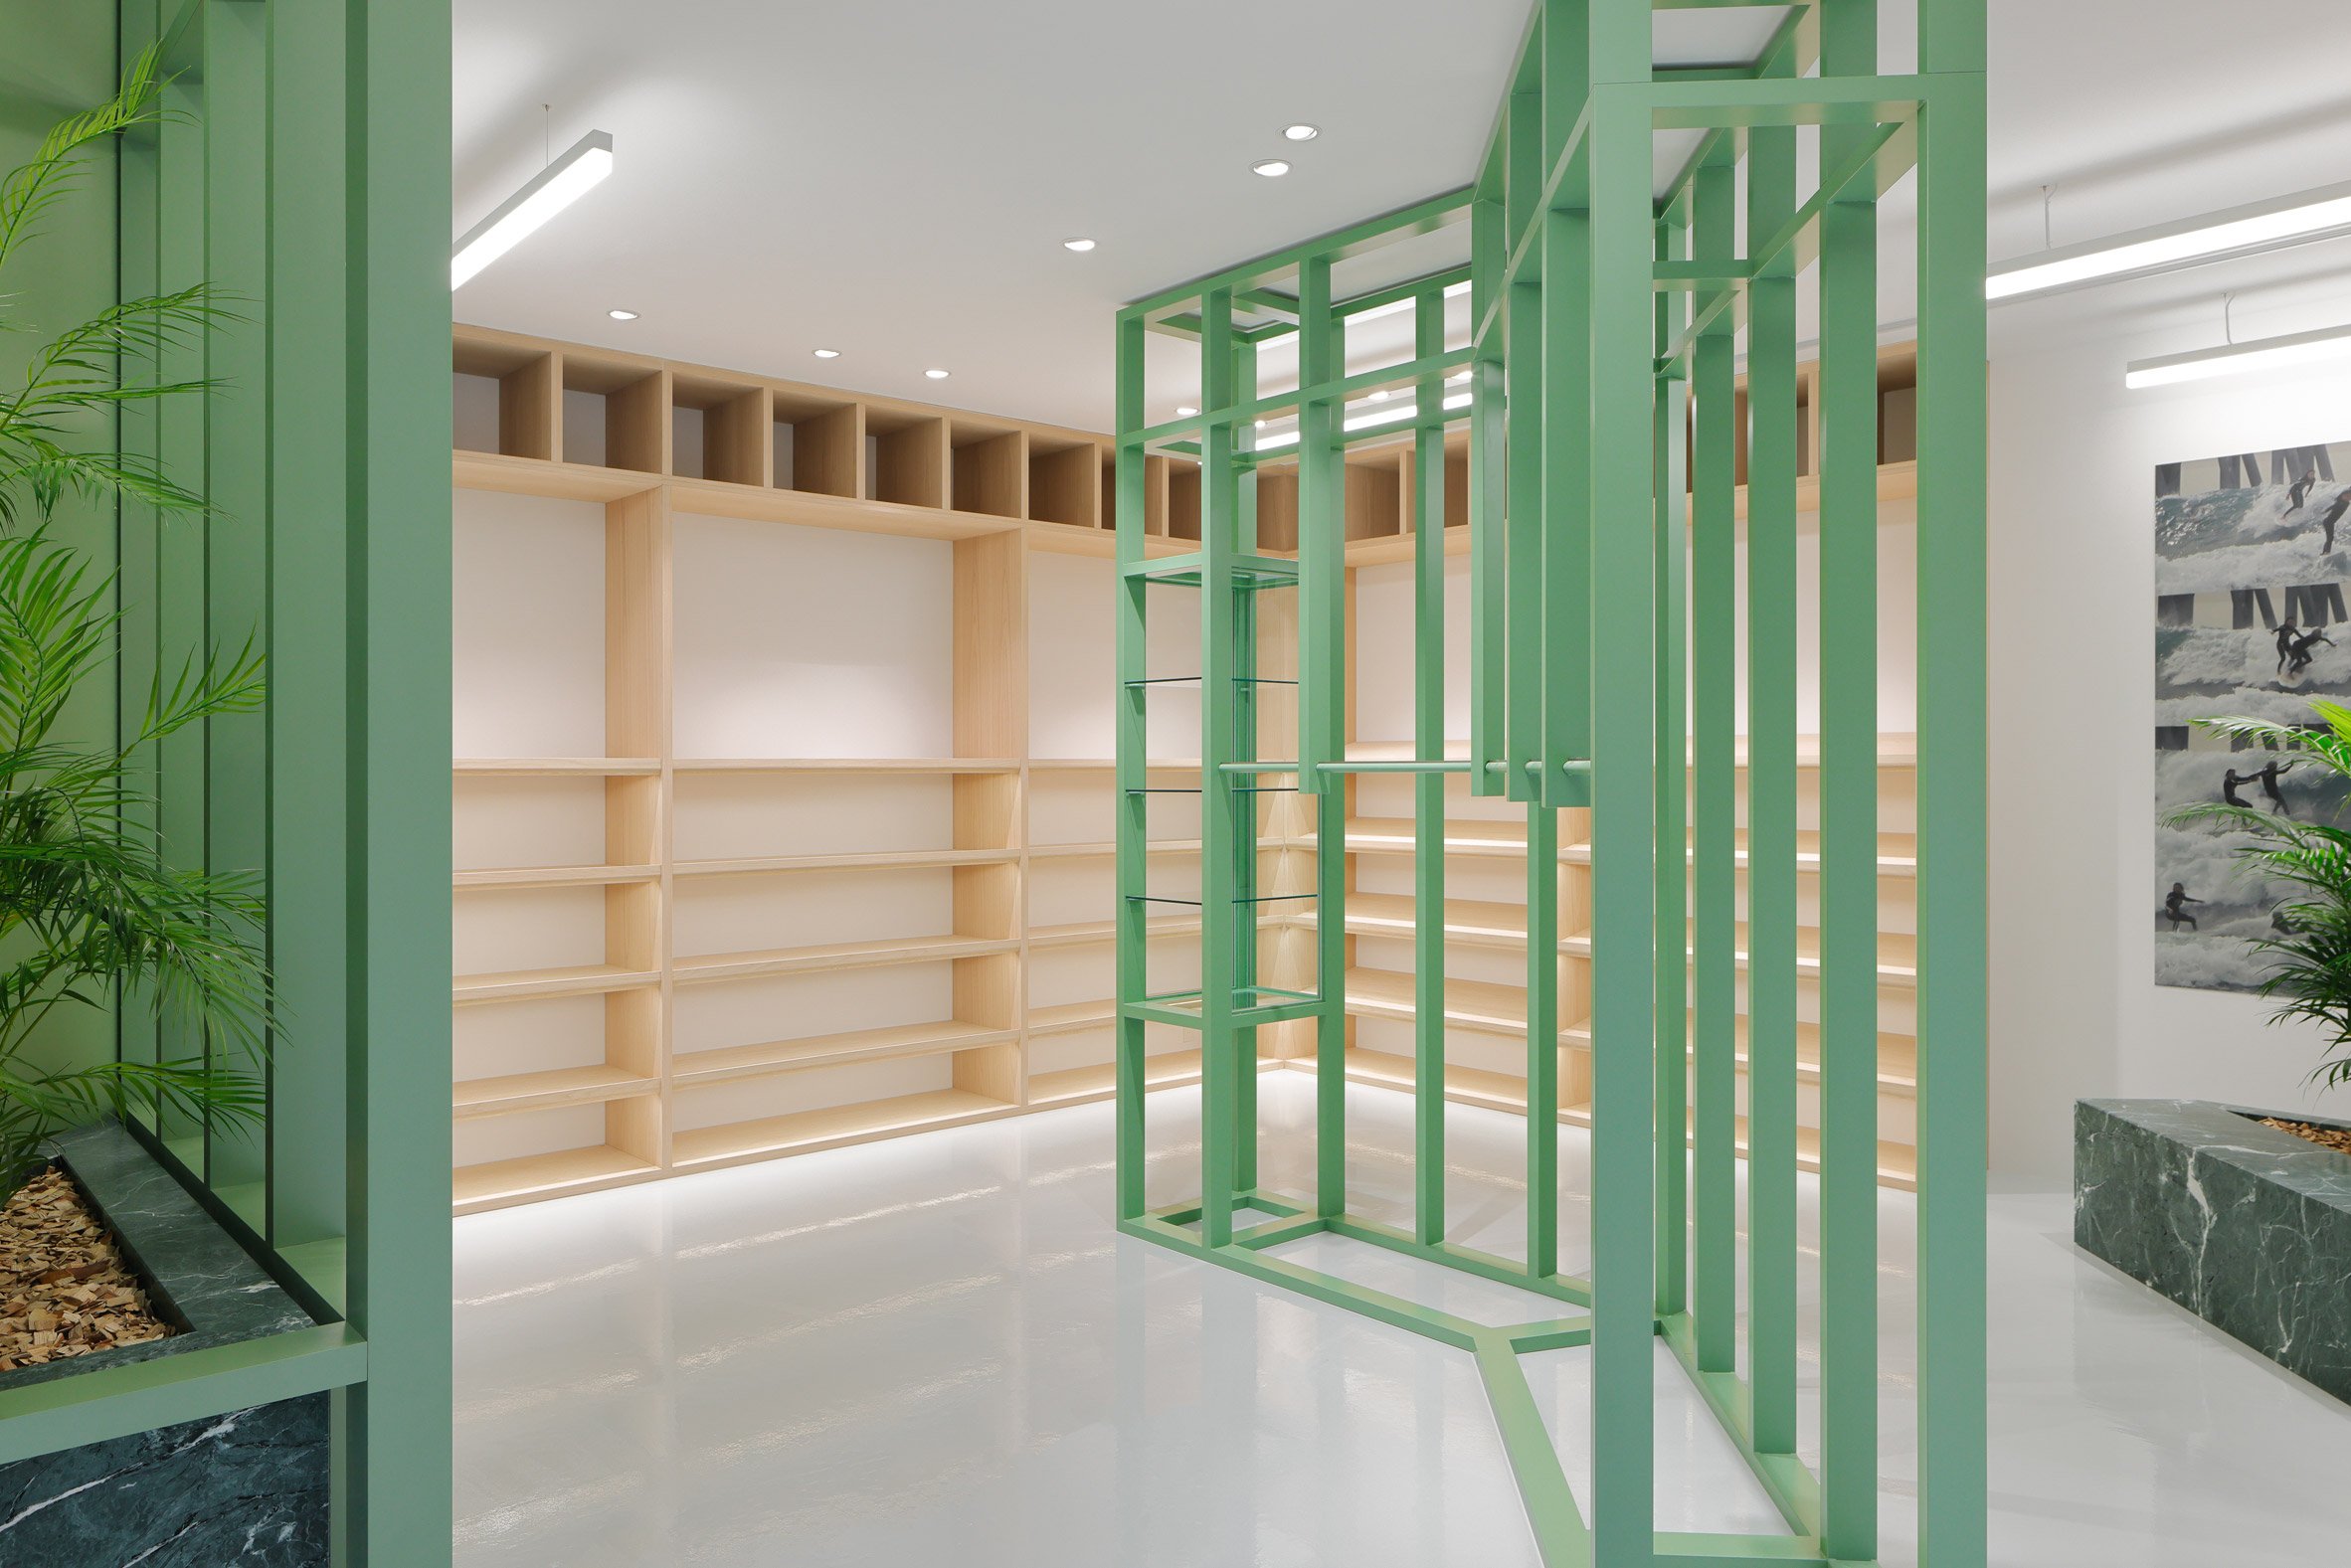 Green and wooden shelving in retail interior by Perron-Roettinger